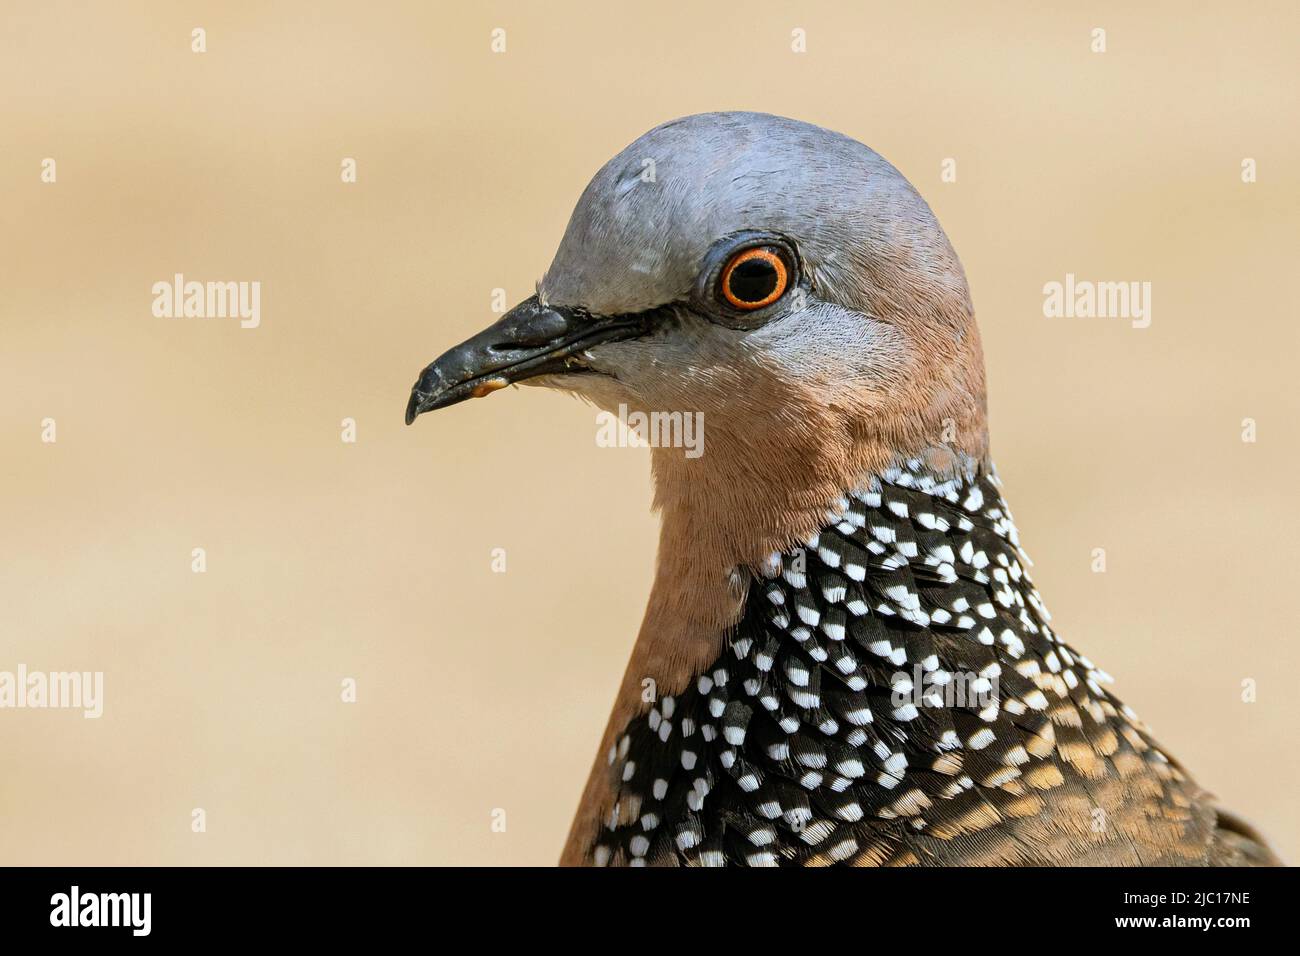 Spotted-necked dove, Spotted dove (Spilopelia chinensis, Streptopelia chinensis), portrait, USA, Hawaii, Maui Stock Photo